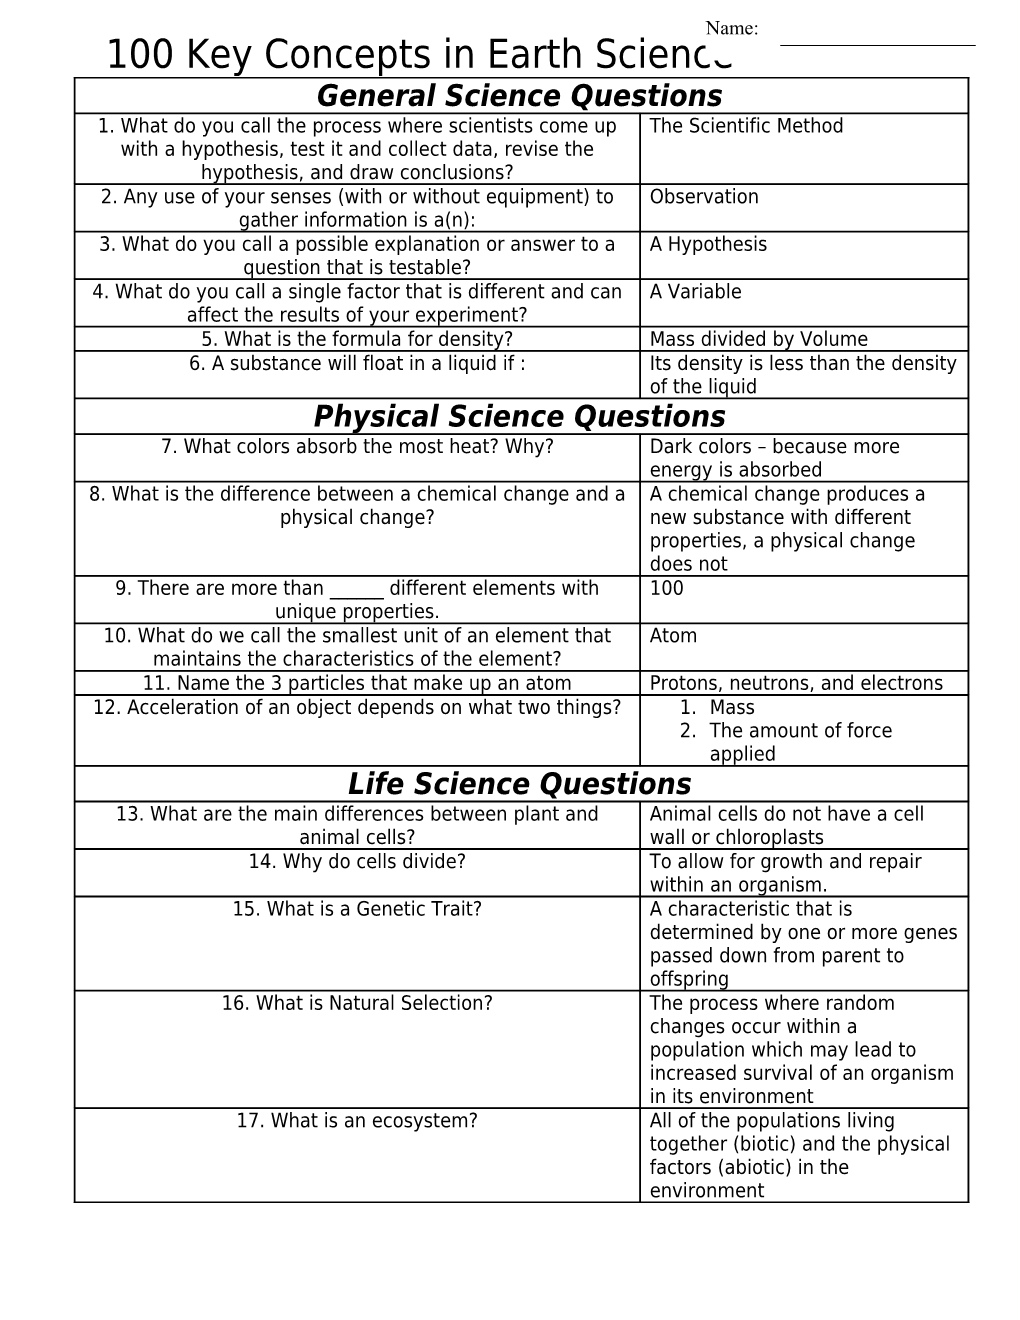 100 Key Concepts in Earth Science